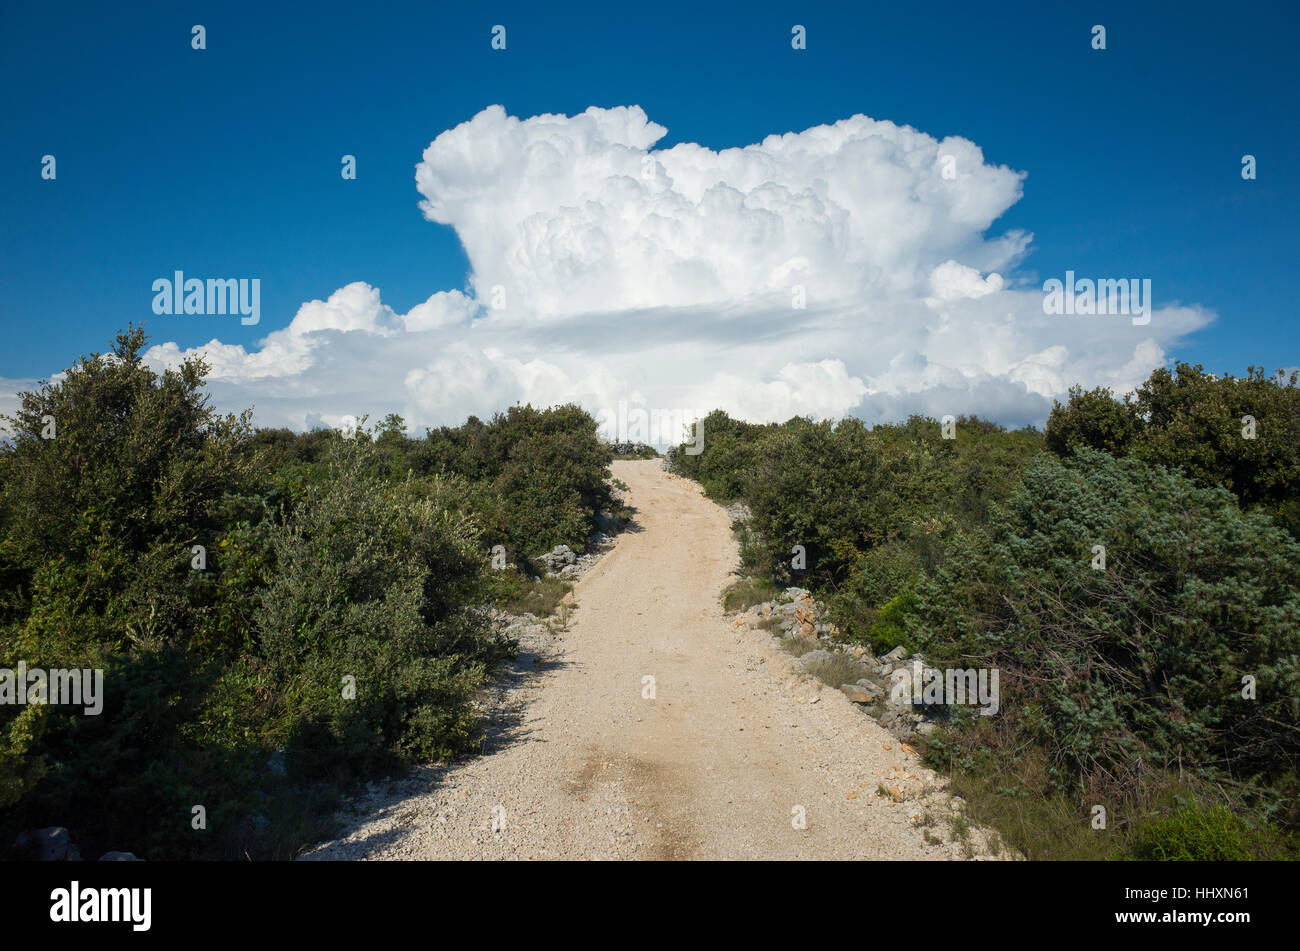 Dalmatia Croatia. Beautiful nature and landscape photo of warm summer day. White clouds and blue sky.Nice happy outdoors image. Stock Photo